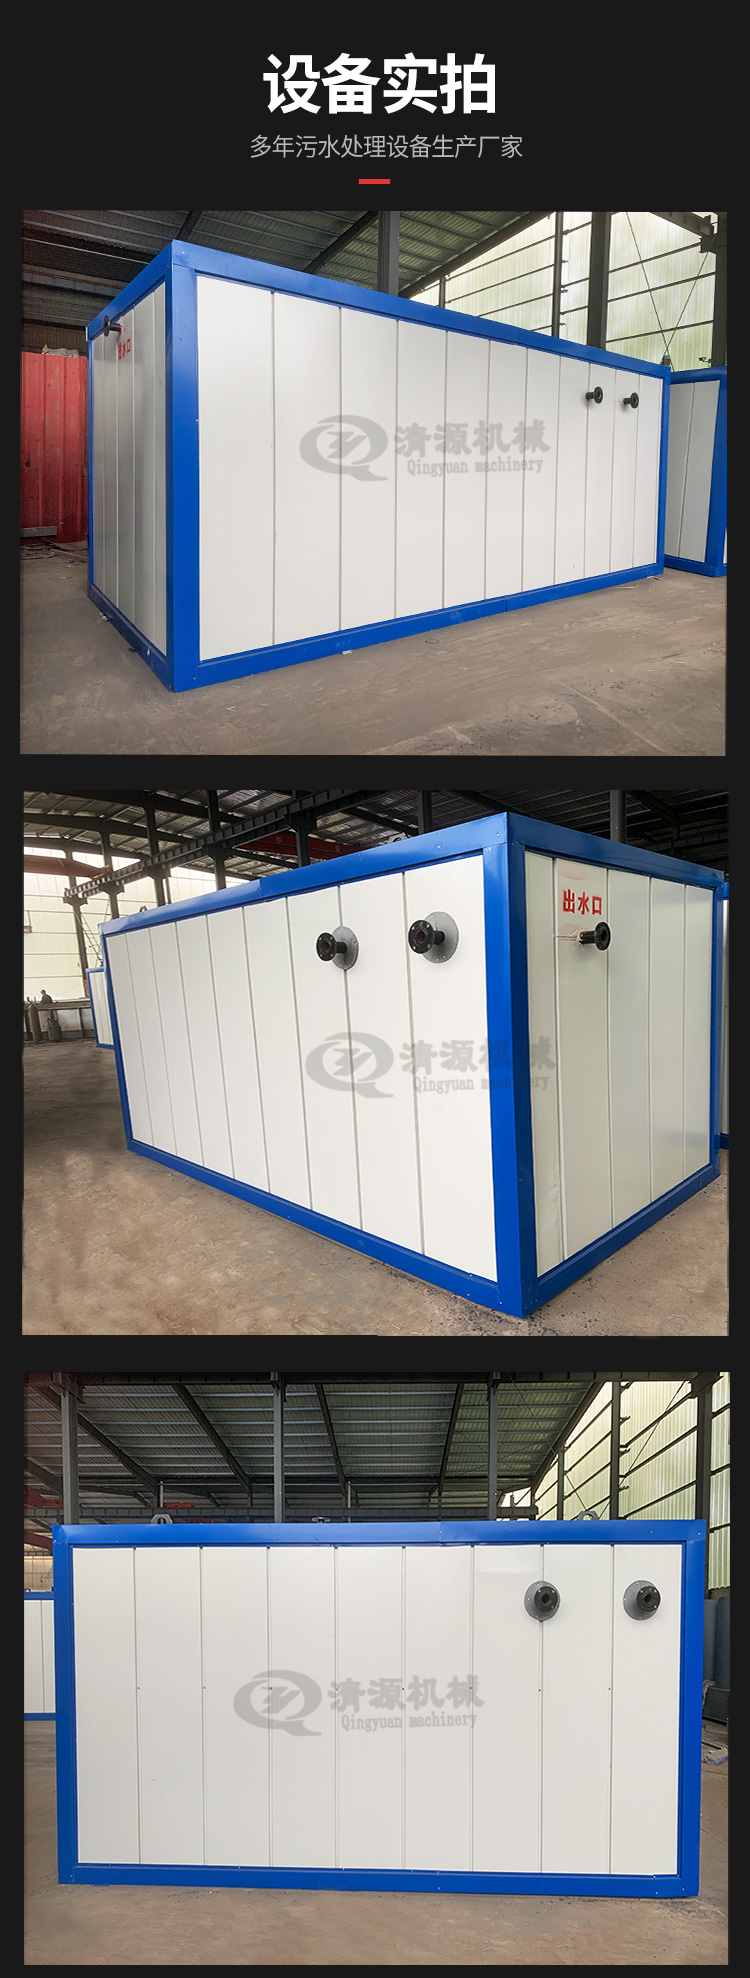 Wine bottle cleaning, oil refining, electroplating, sewage treatment equipment, source cleaning, standard discharge, after-sales warranty for one year